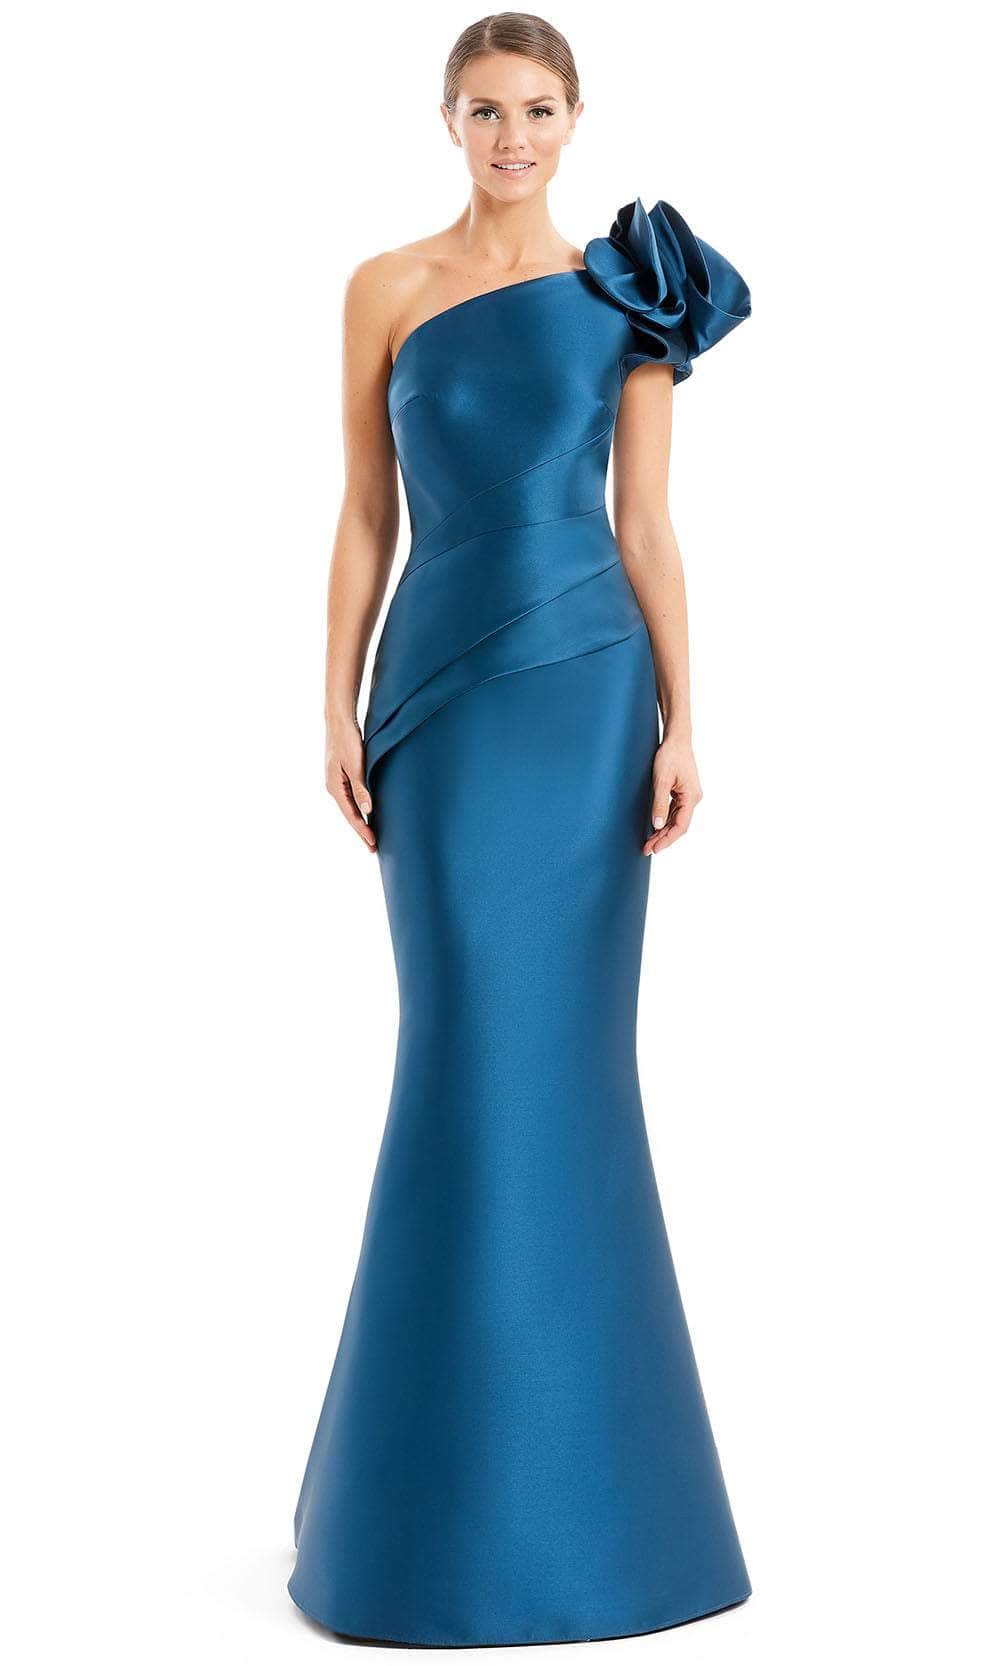 Alexander By Daymor 1673F22 - Asymmetric Pleated Peplum Evening Gown Special Occasion Dress 4 / Teal Blue